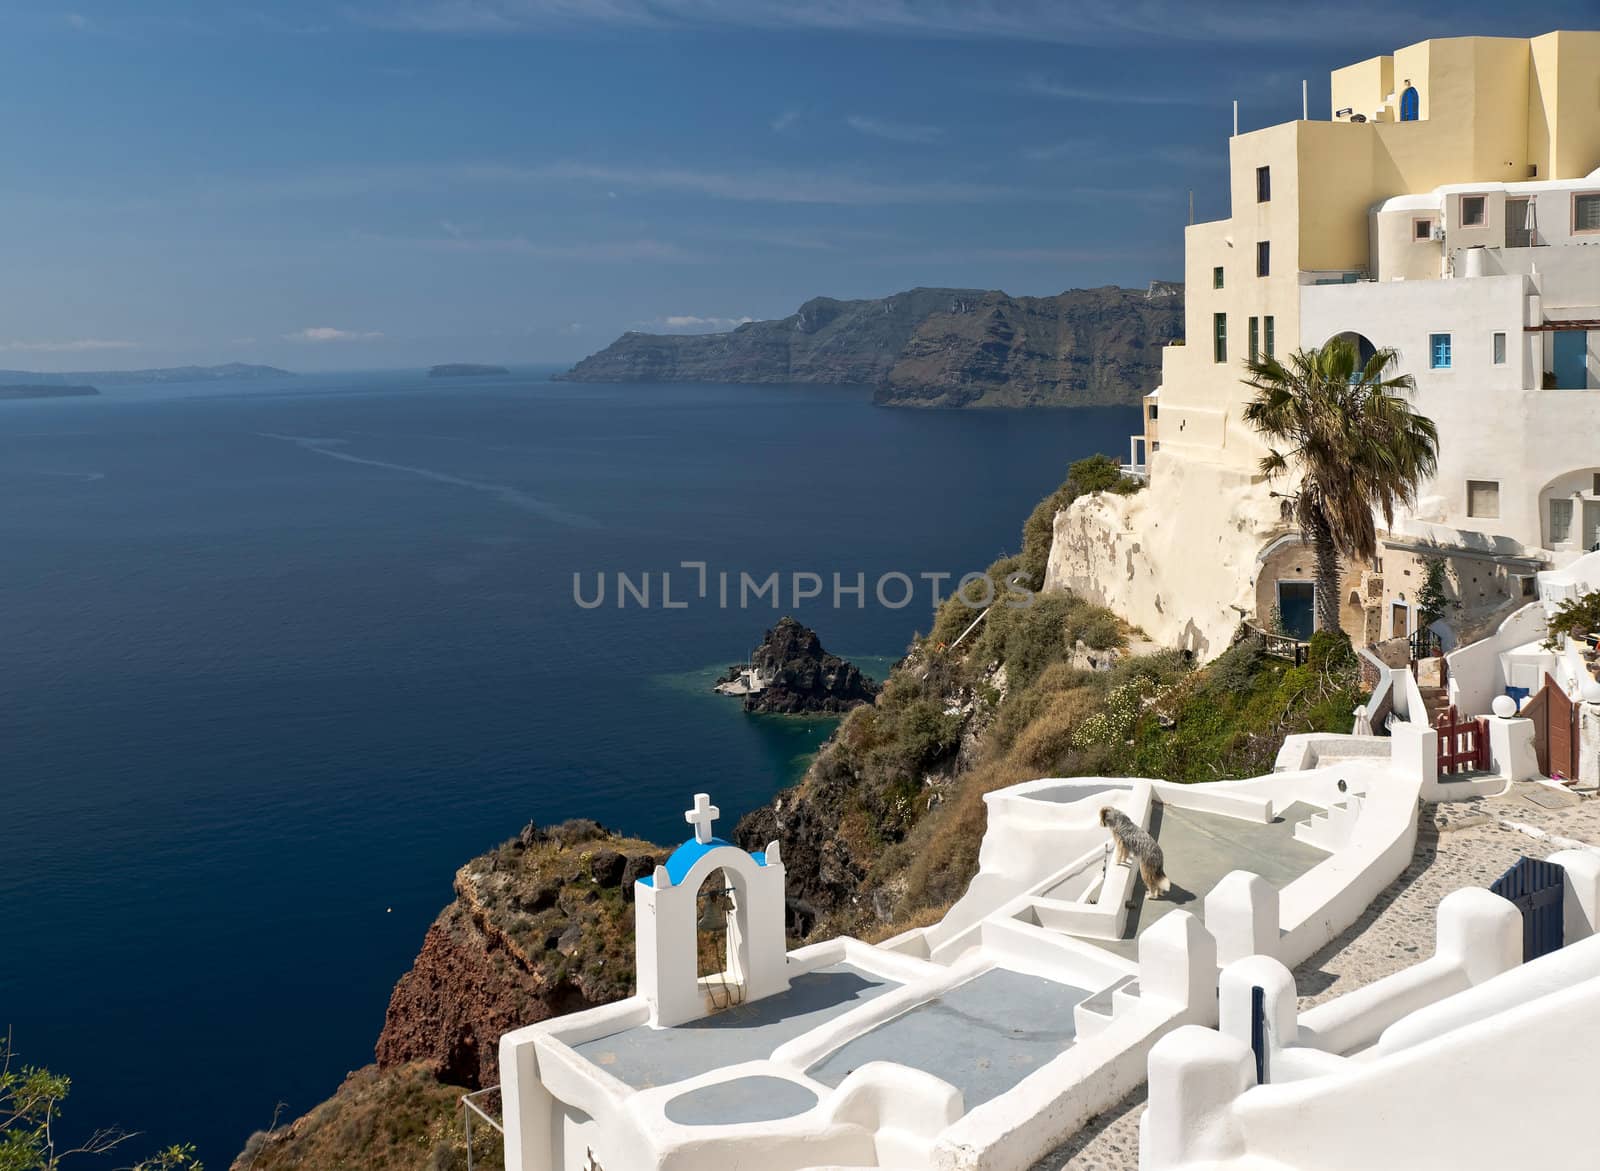 Santorini buildings and the dog by mulden